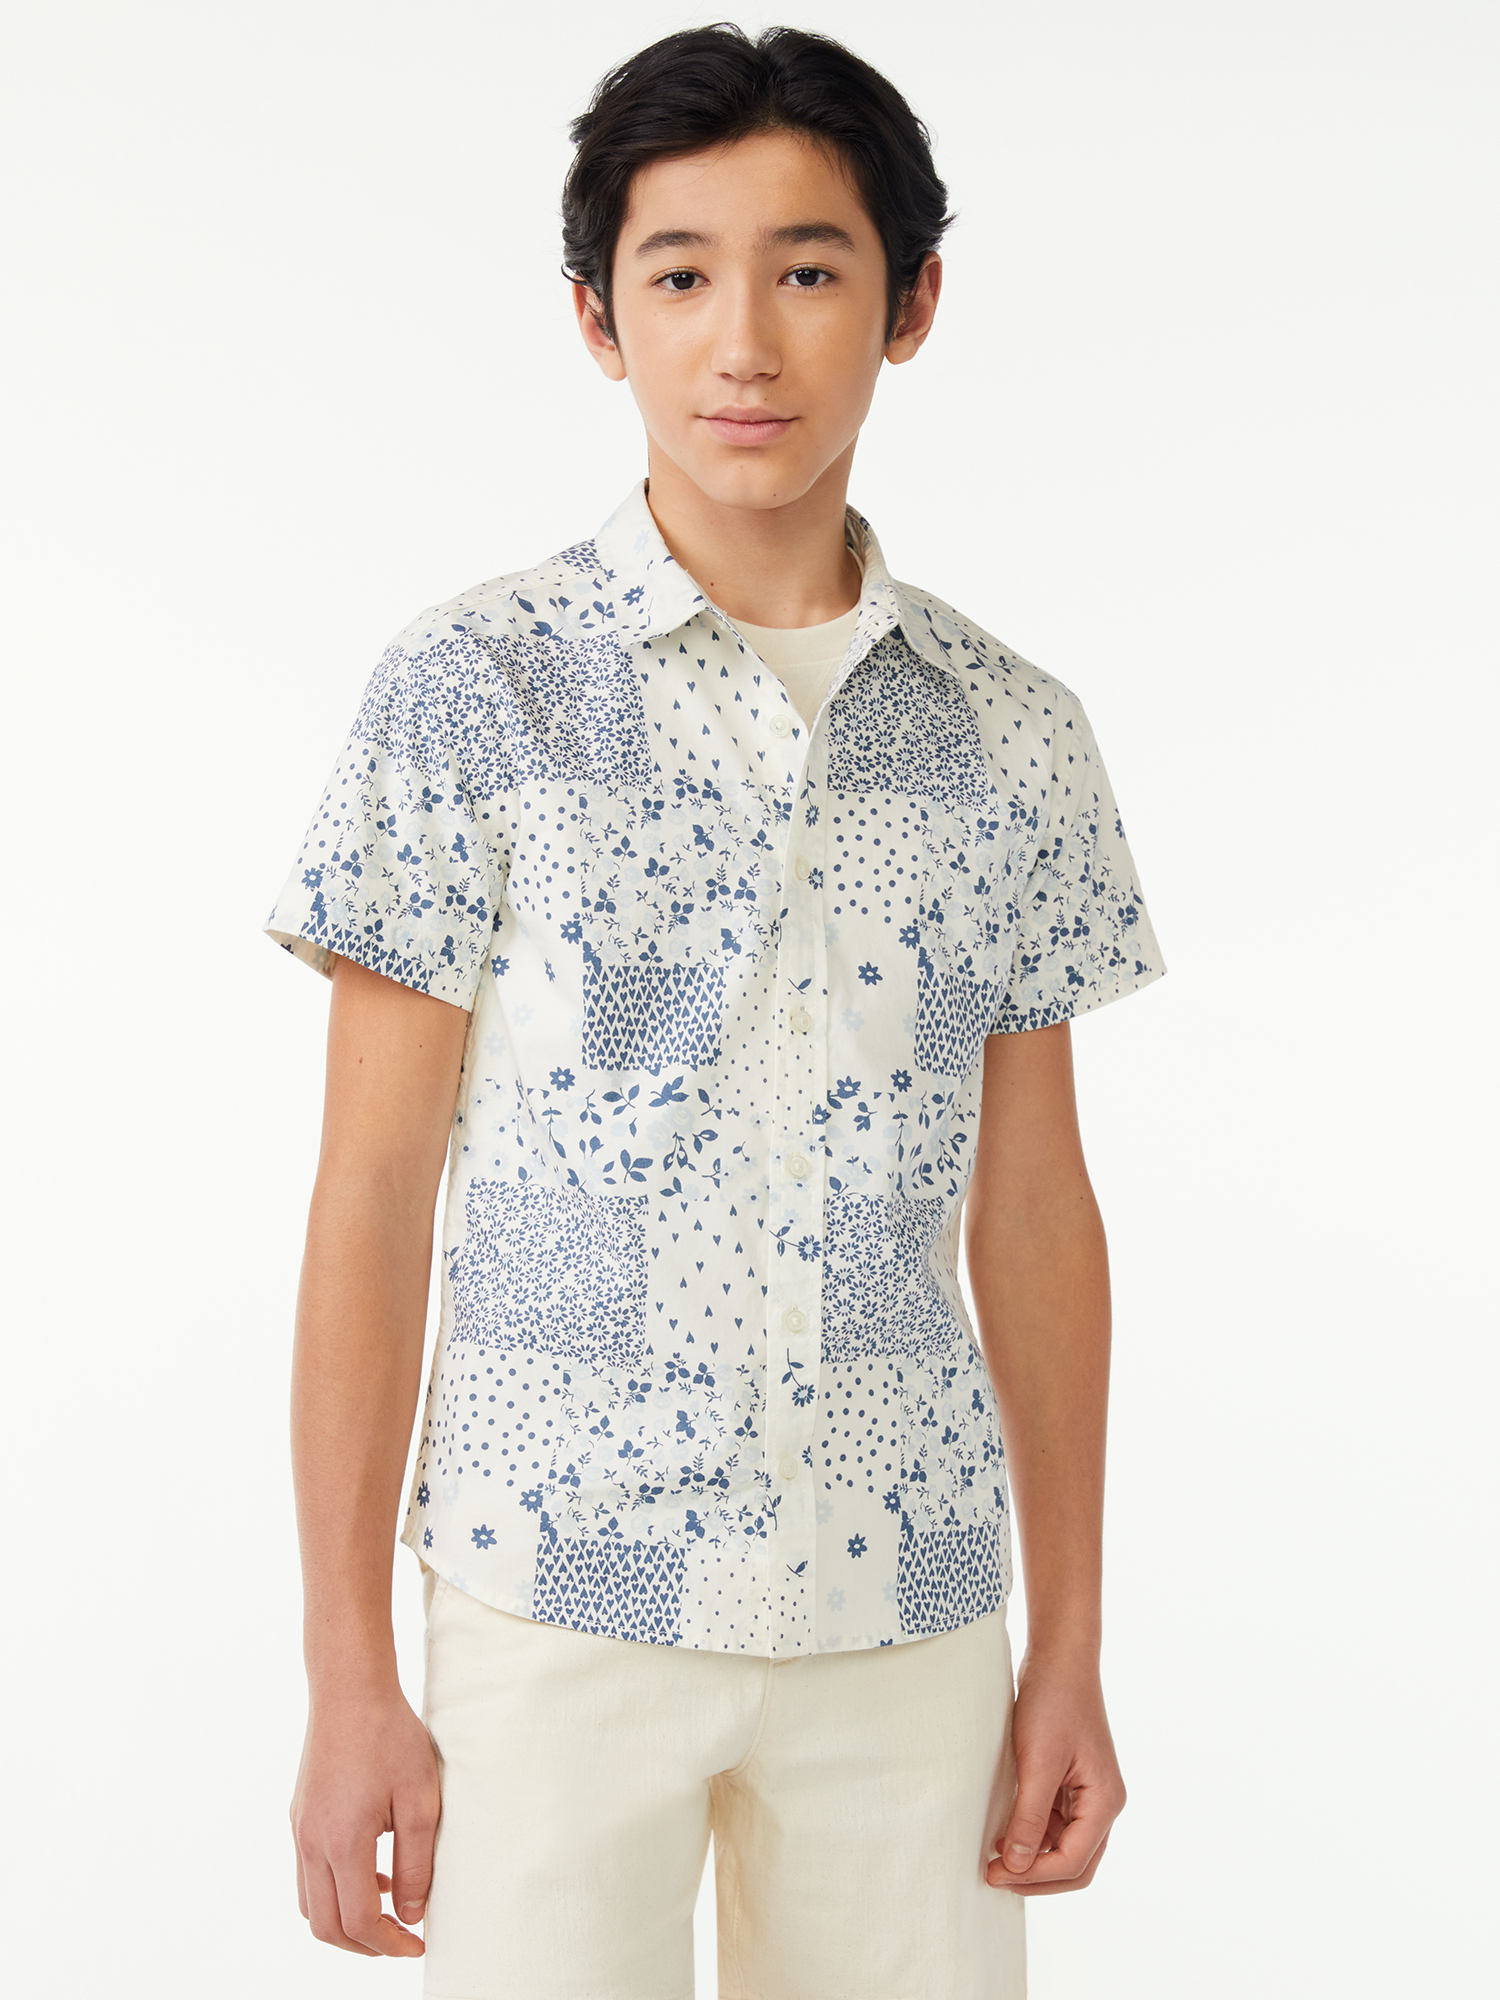 Free Assembly Boys Floral Print Button Down Shirt, Sizes 4-18 - image 1 of 5